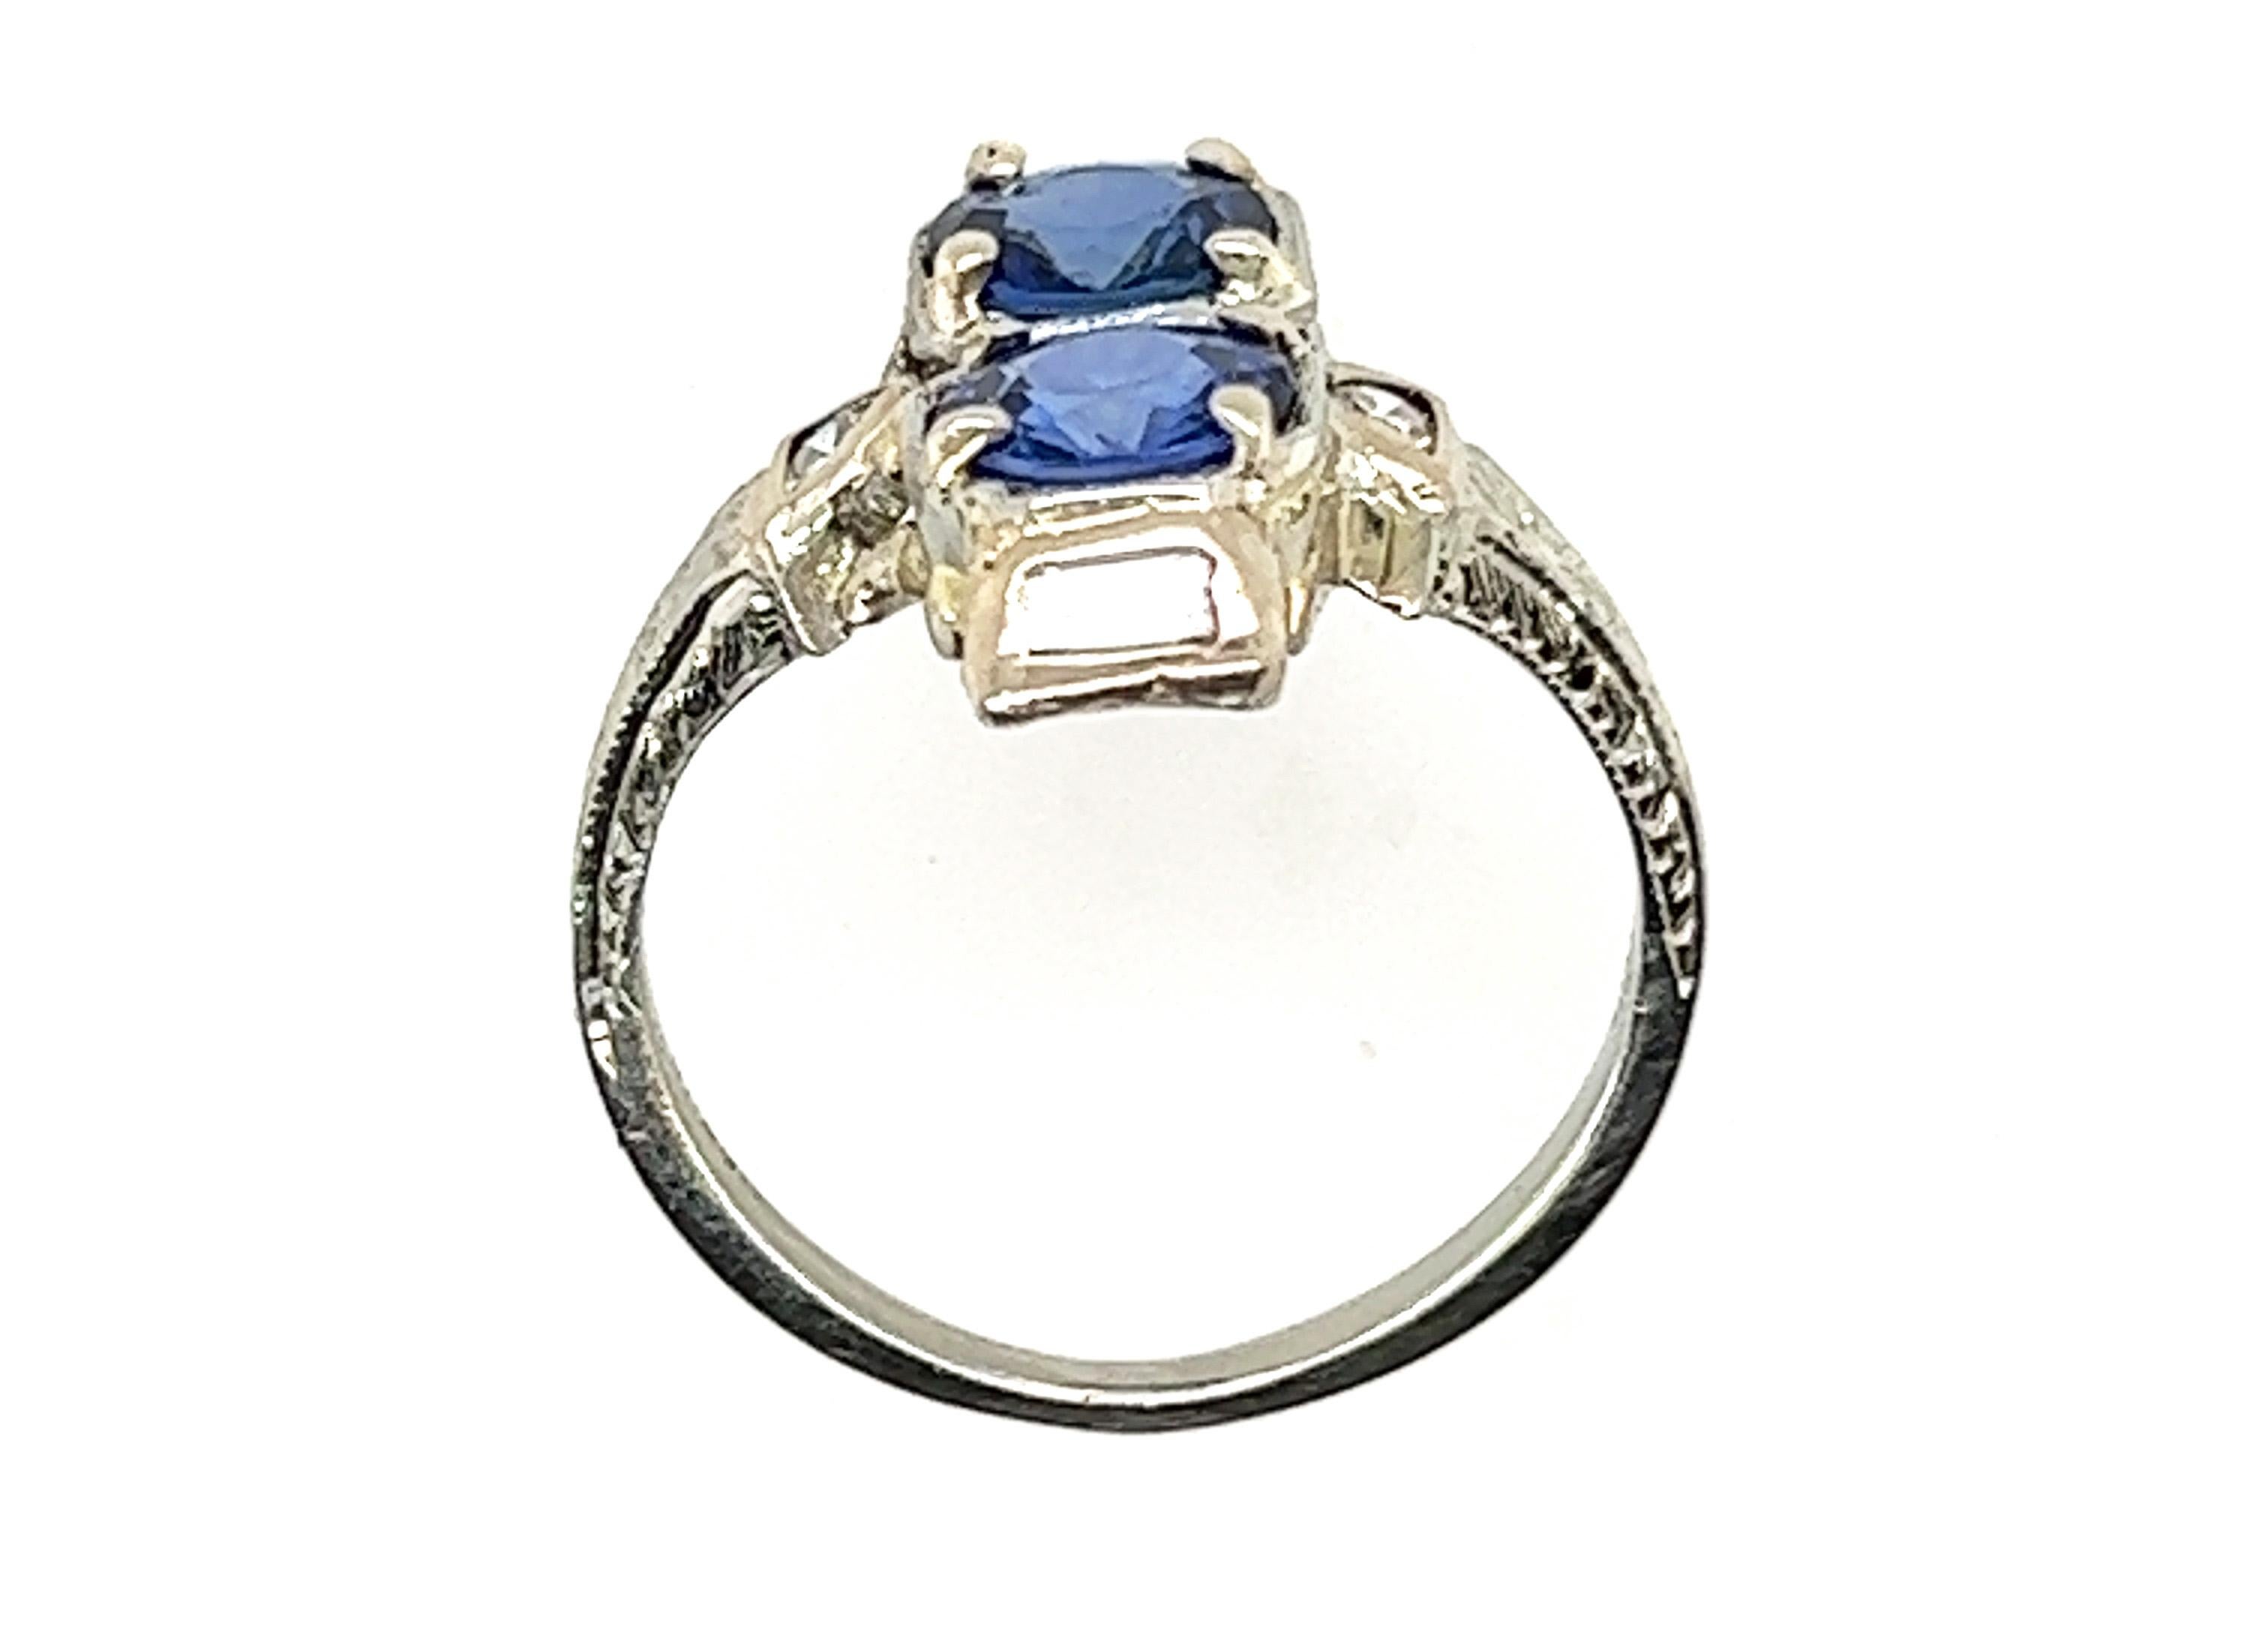 Genuine Original Antique from 1920s Two Stone Sapphire Diamond Cocktail Ring 2ct 18K White Gold Art Deco


Featuring 2 Brilliant Bold Natural Blue 5.7mm Sapphires 

100% Natural Sapphires & Mined Diamonds 

Trademarked Piece

1.94 Carat Gemstone &